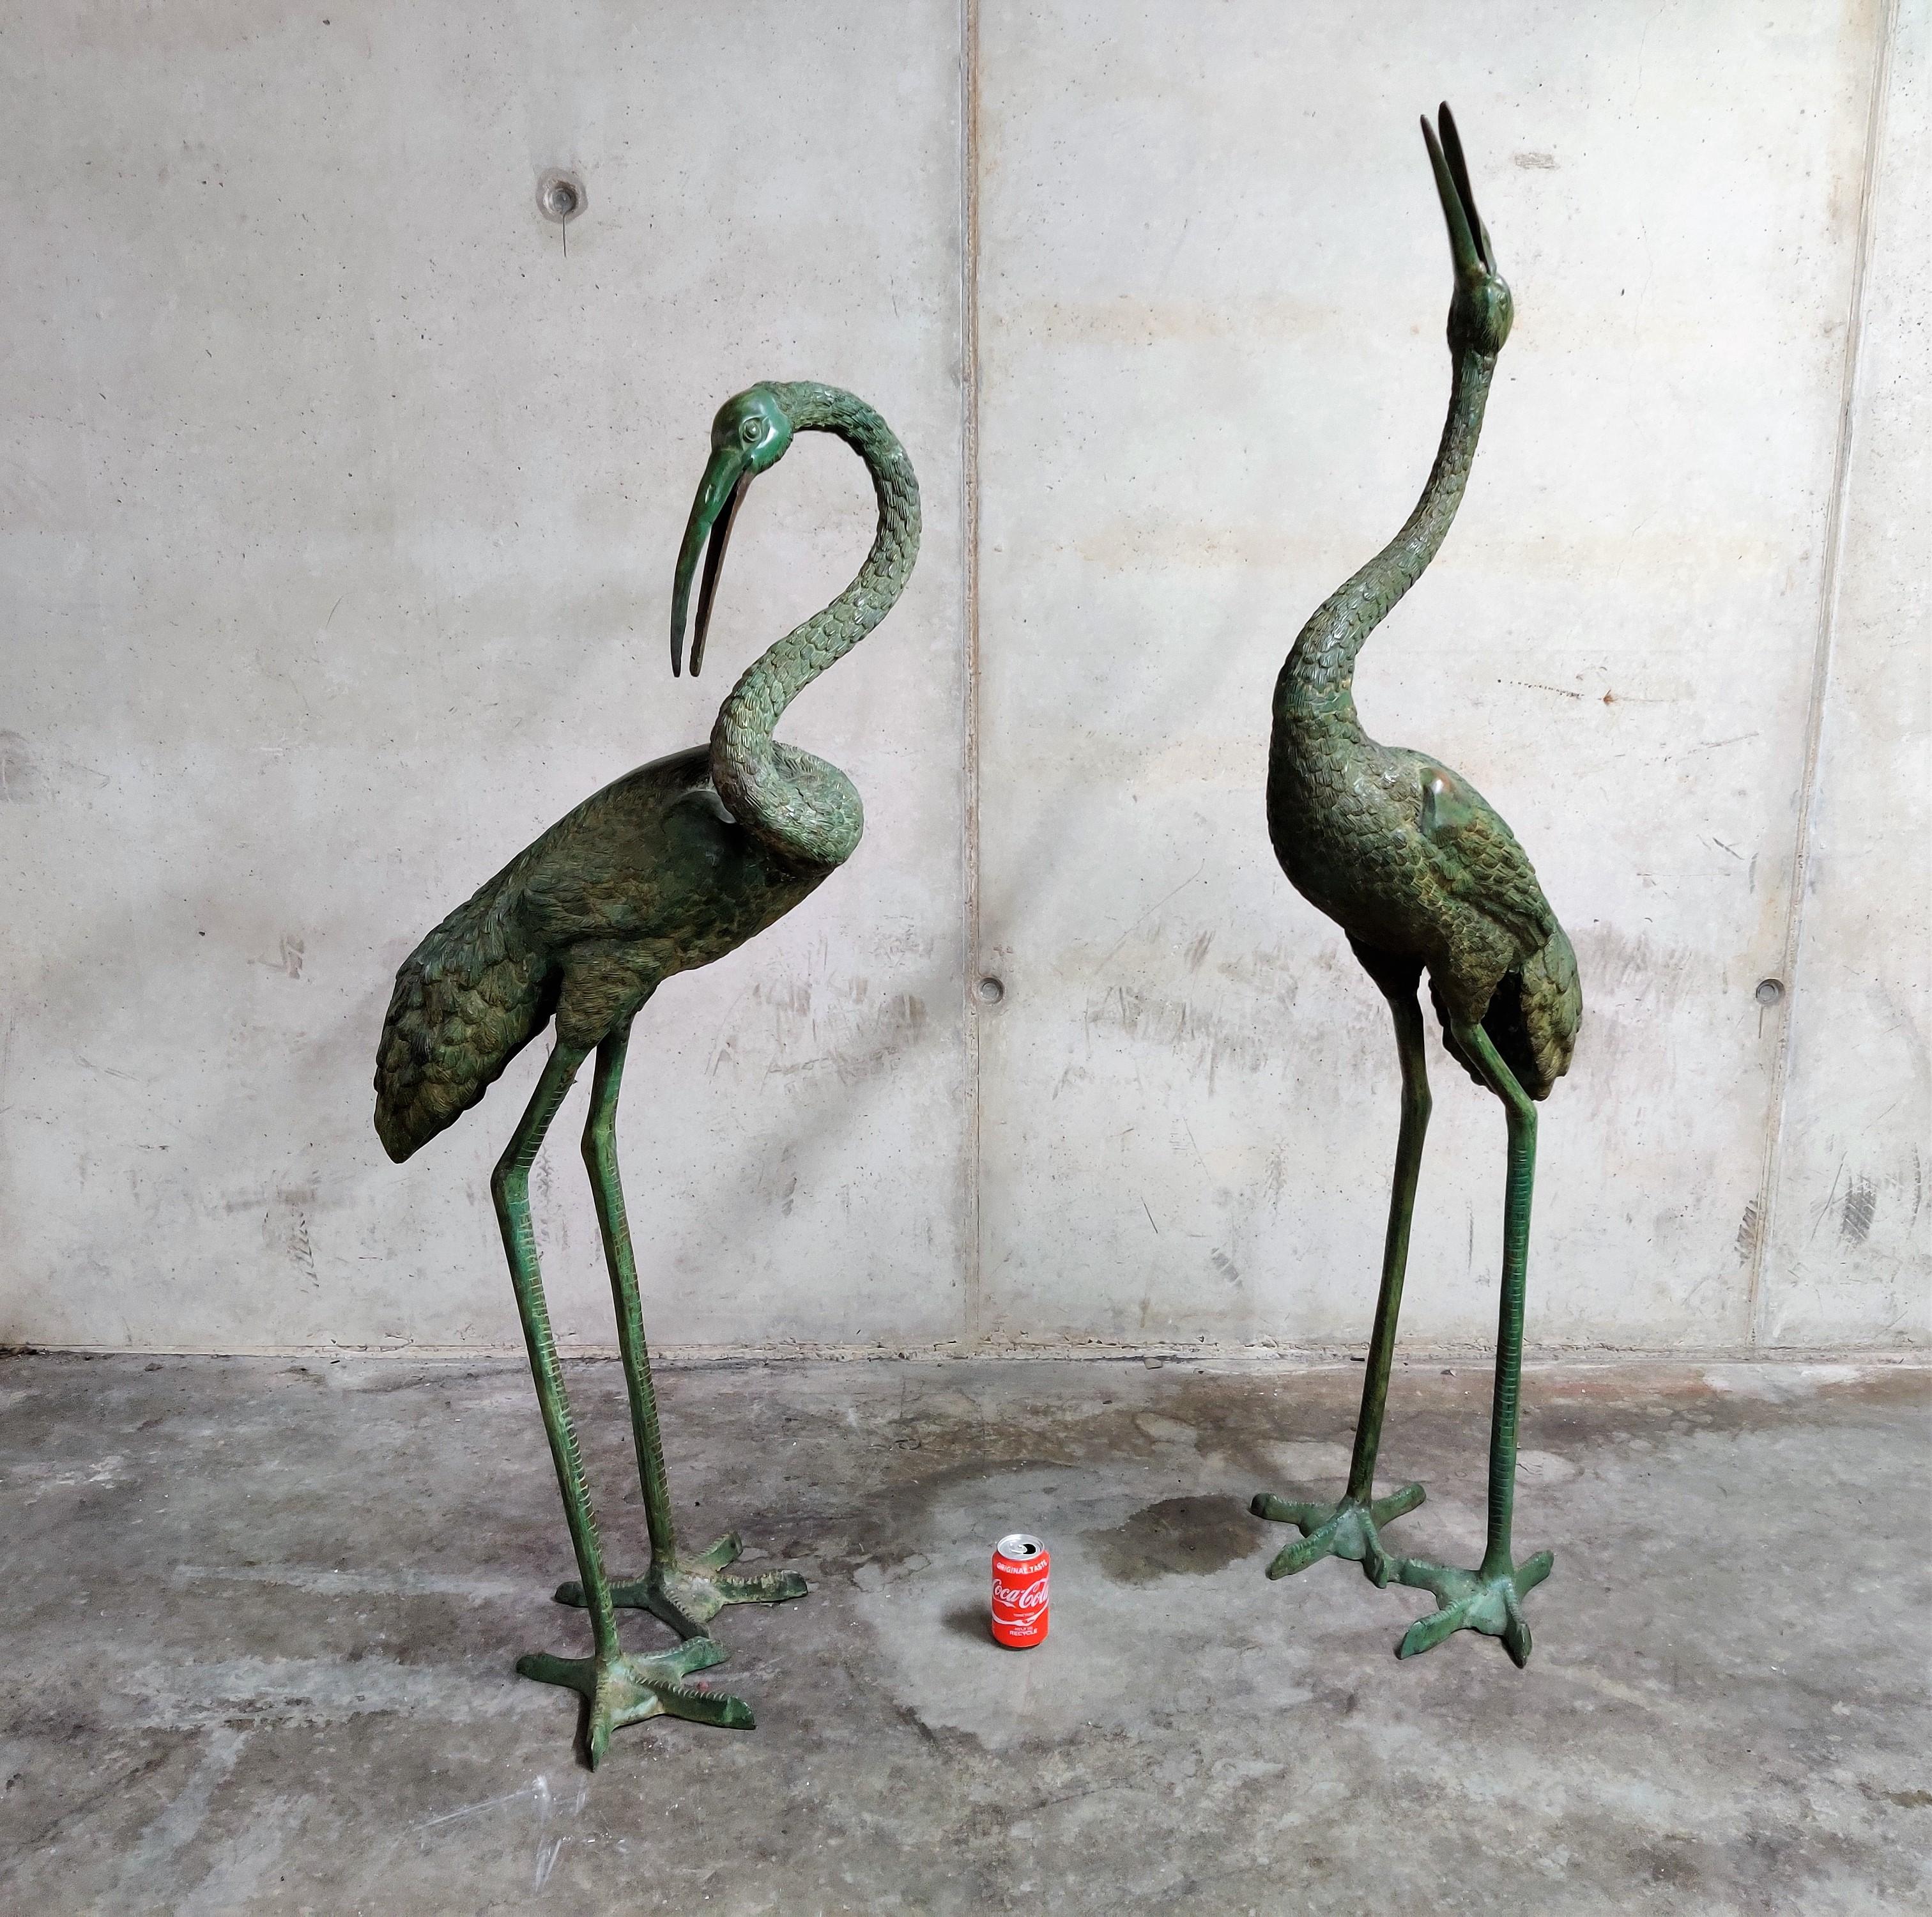 Extremely large patinated bronze crane bird statues.

Beautifully detailed an imposing bird statues suitable for both in house and garden ornaments.

Real eye catchers that rarely are available in this size

1970s, France

Measures: Height